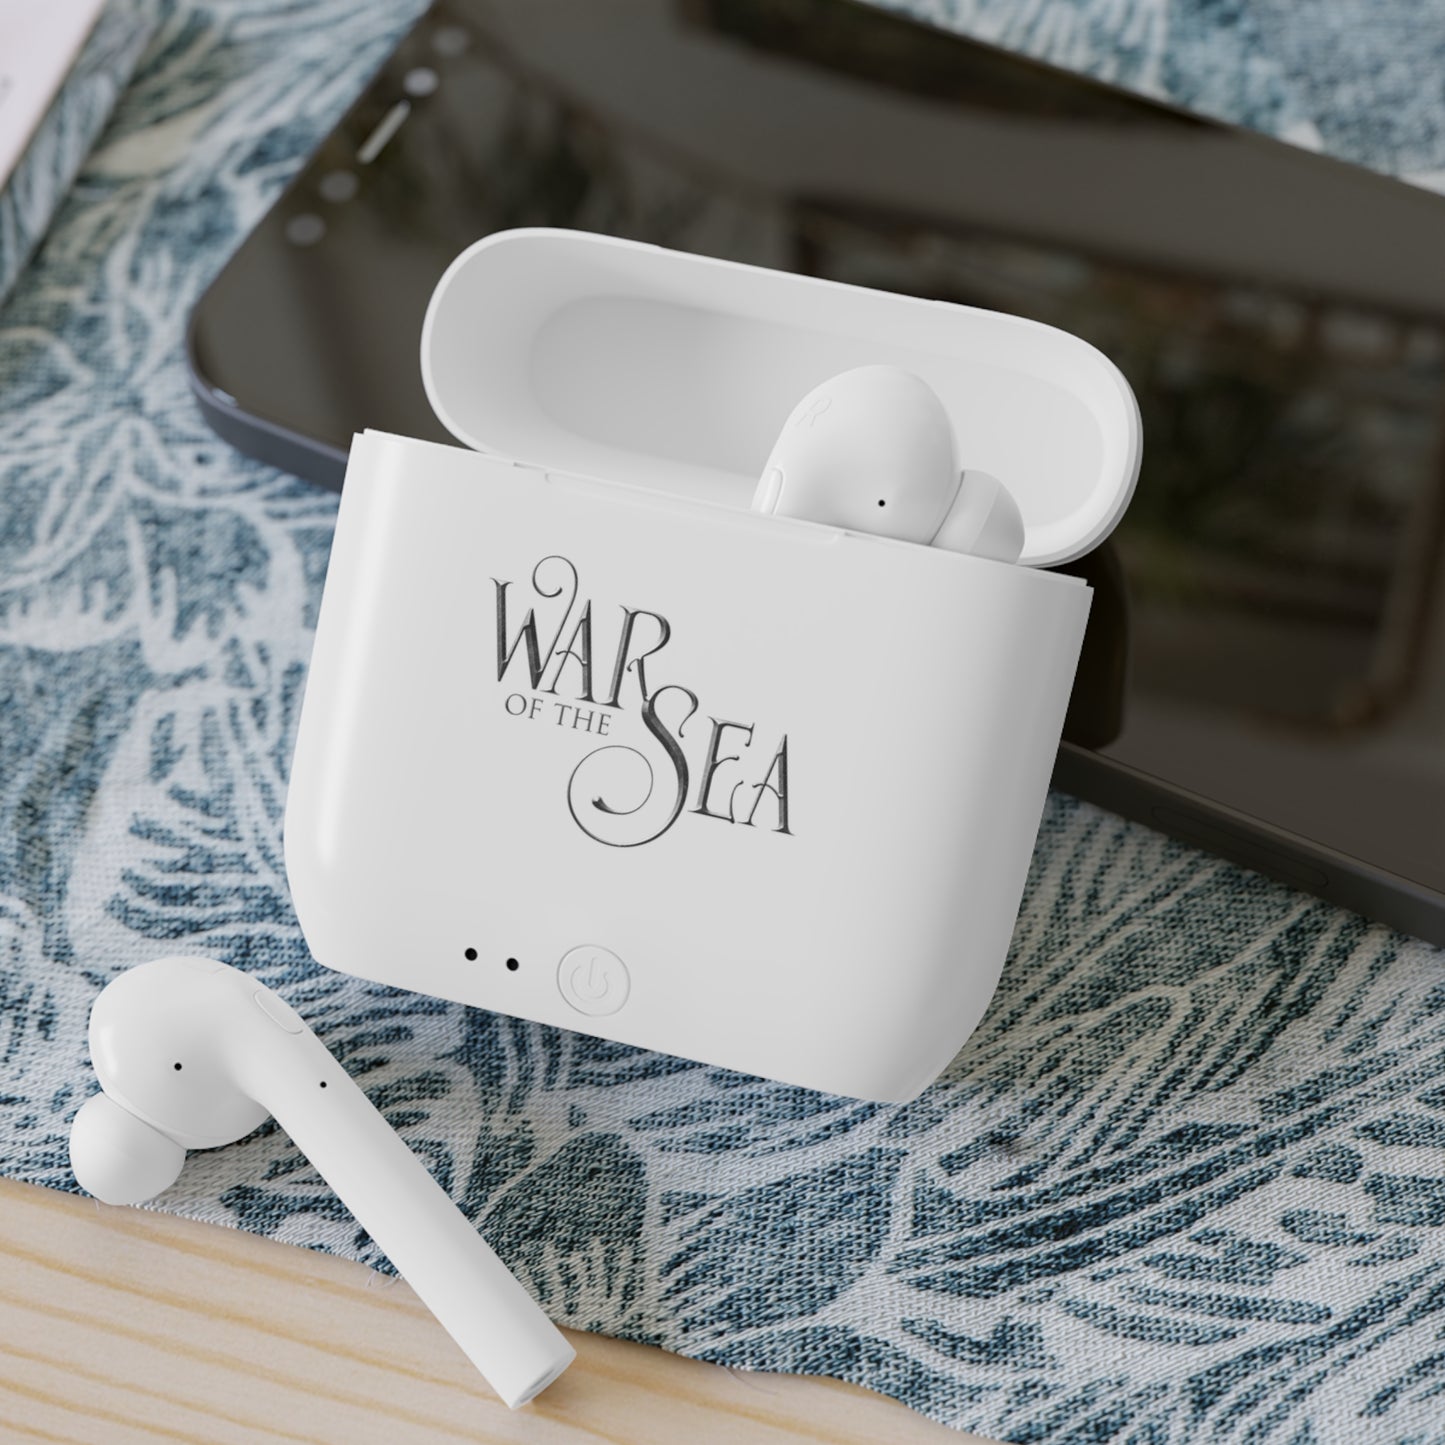 "War of the Sea" Essos Wireless Earbuds